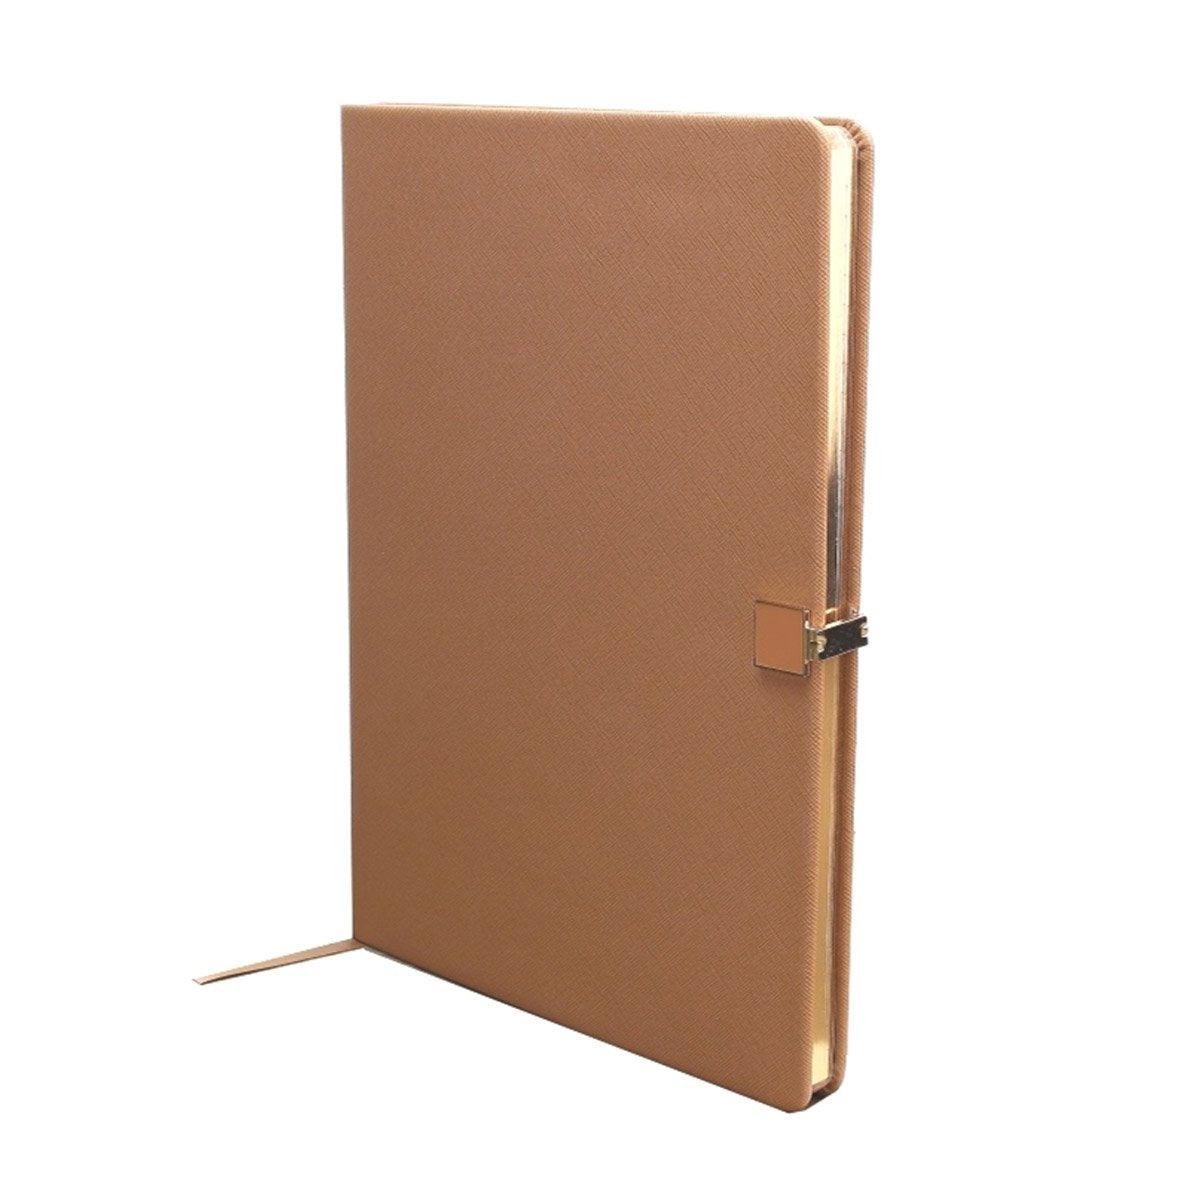 Addison Ross Notebook A4 with Gold by Addison Ross